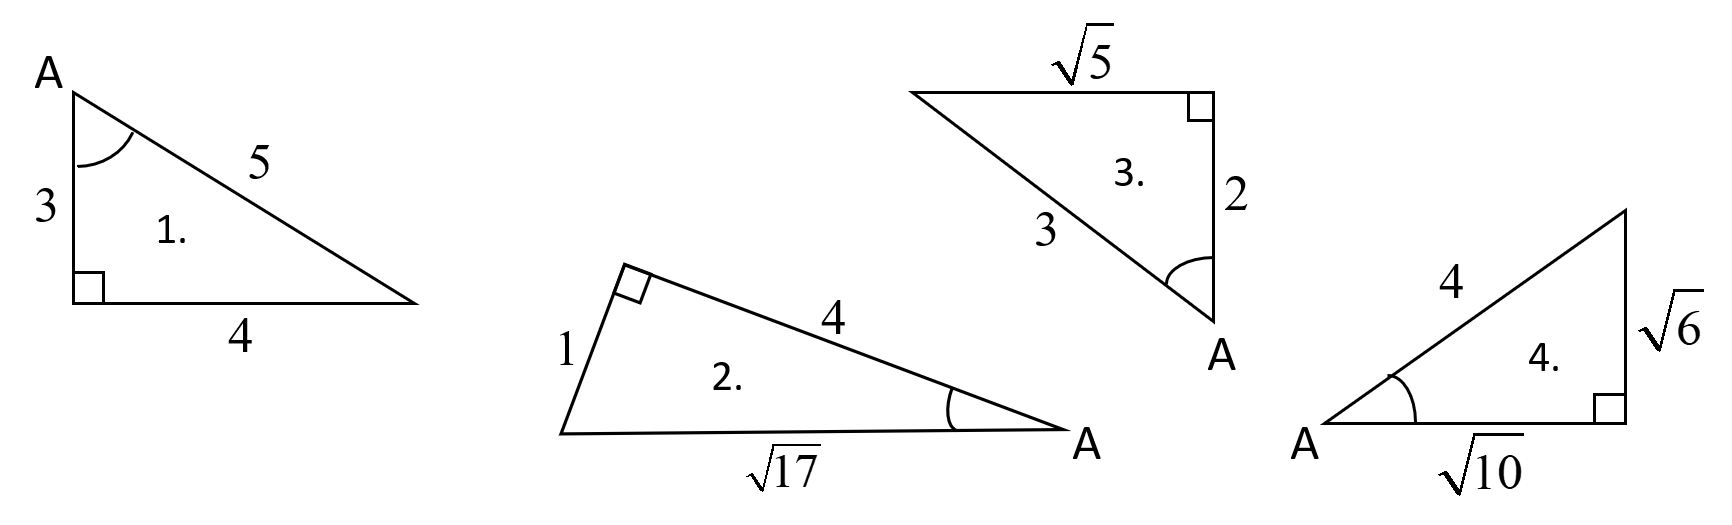 5.2e #1-#4 triangles.png